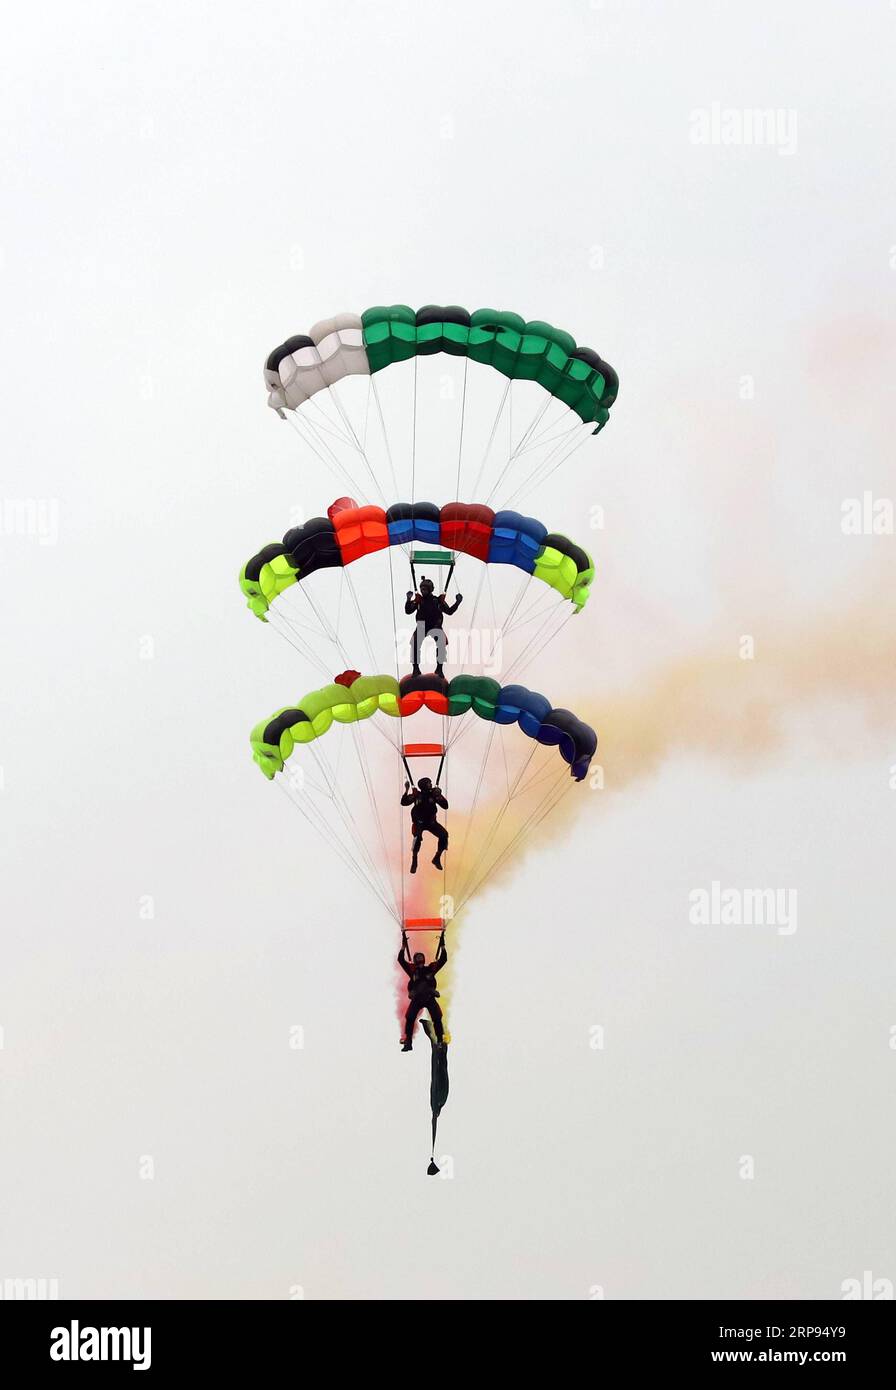 (190323) -- ISLAMABAD, March 23, 2019 -- Pakistan army paratroopers perform during an air show to mark the Pakistan National Day in Islamabad, capital of Pakistan, on March 23, 2019. Pakistan National Day, also known as Pakistan Resolution Day or Republic Day, is celebrated annually on March 23. ) PAKISTAN-ISLAMABAD-NATIONAL DAY-AIR SHOW AhmadxKamal PUBLICATIONxNOTxINxCHN Stock Photo